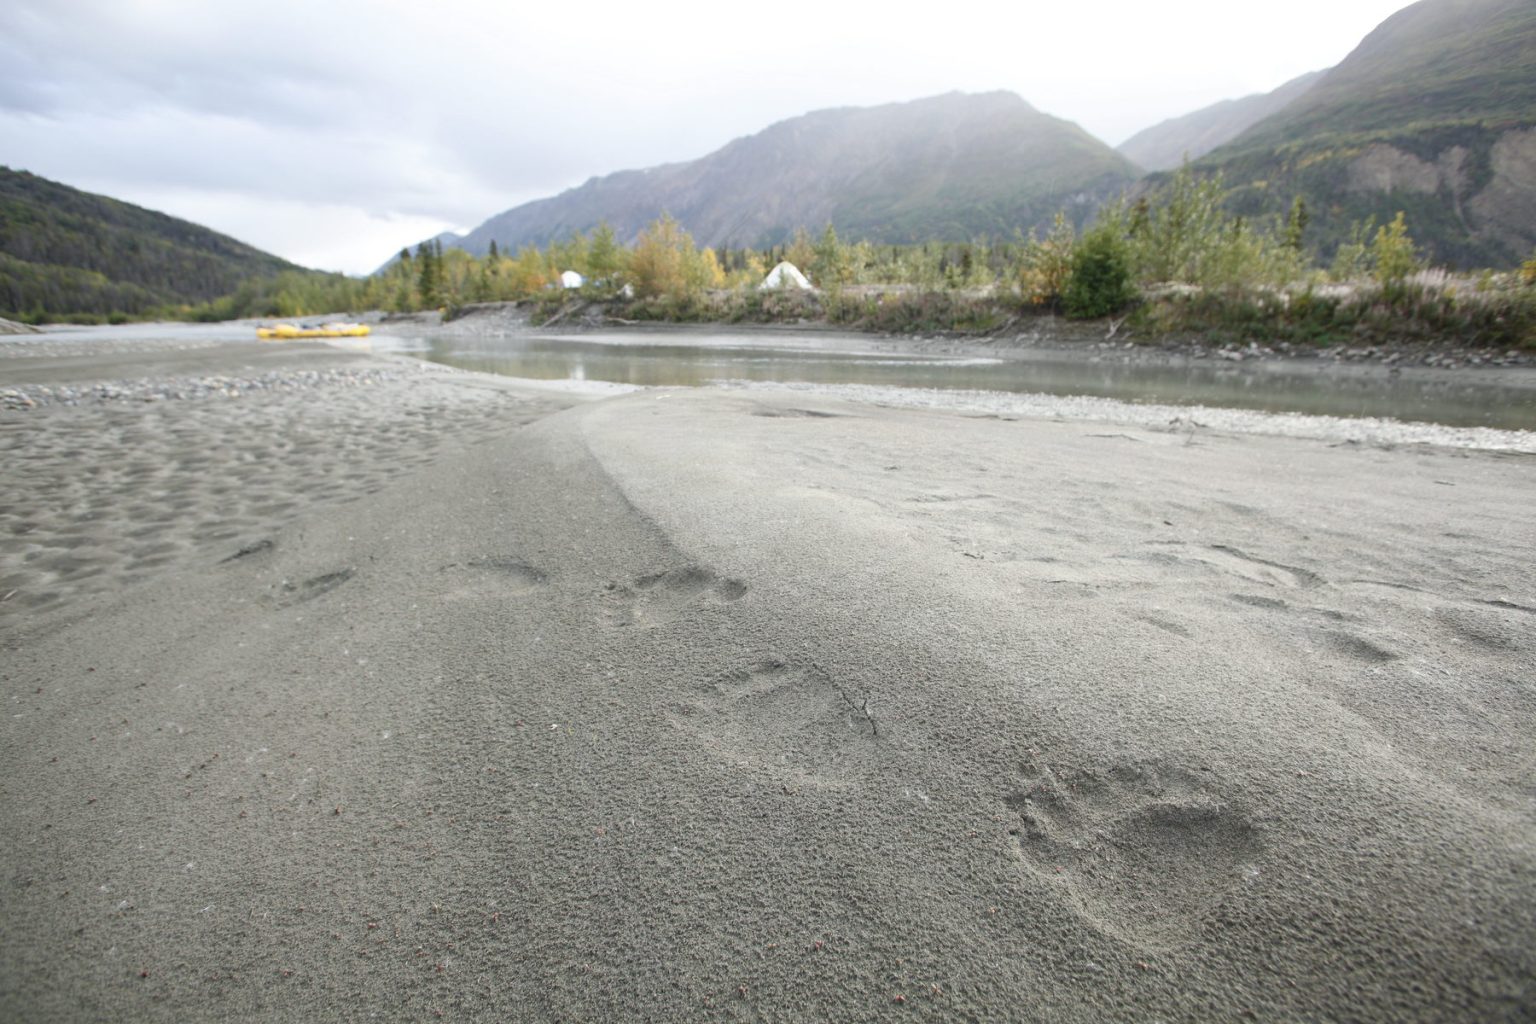 Grizzly tracks spotted on the shore of the Tatshenshini